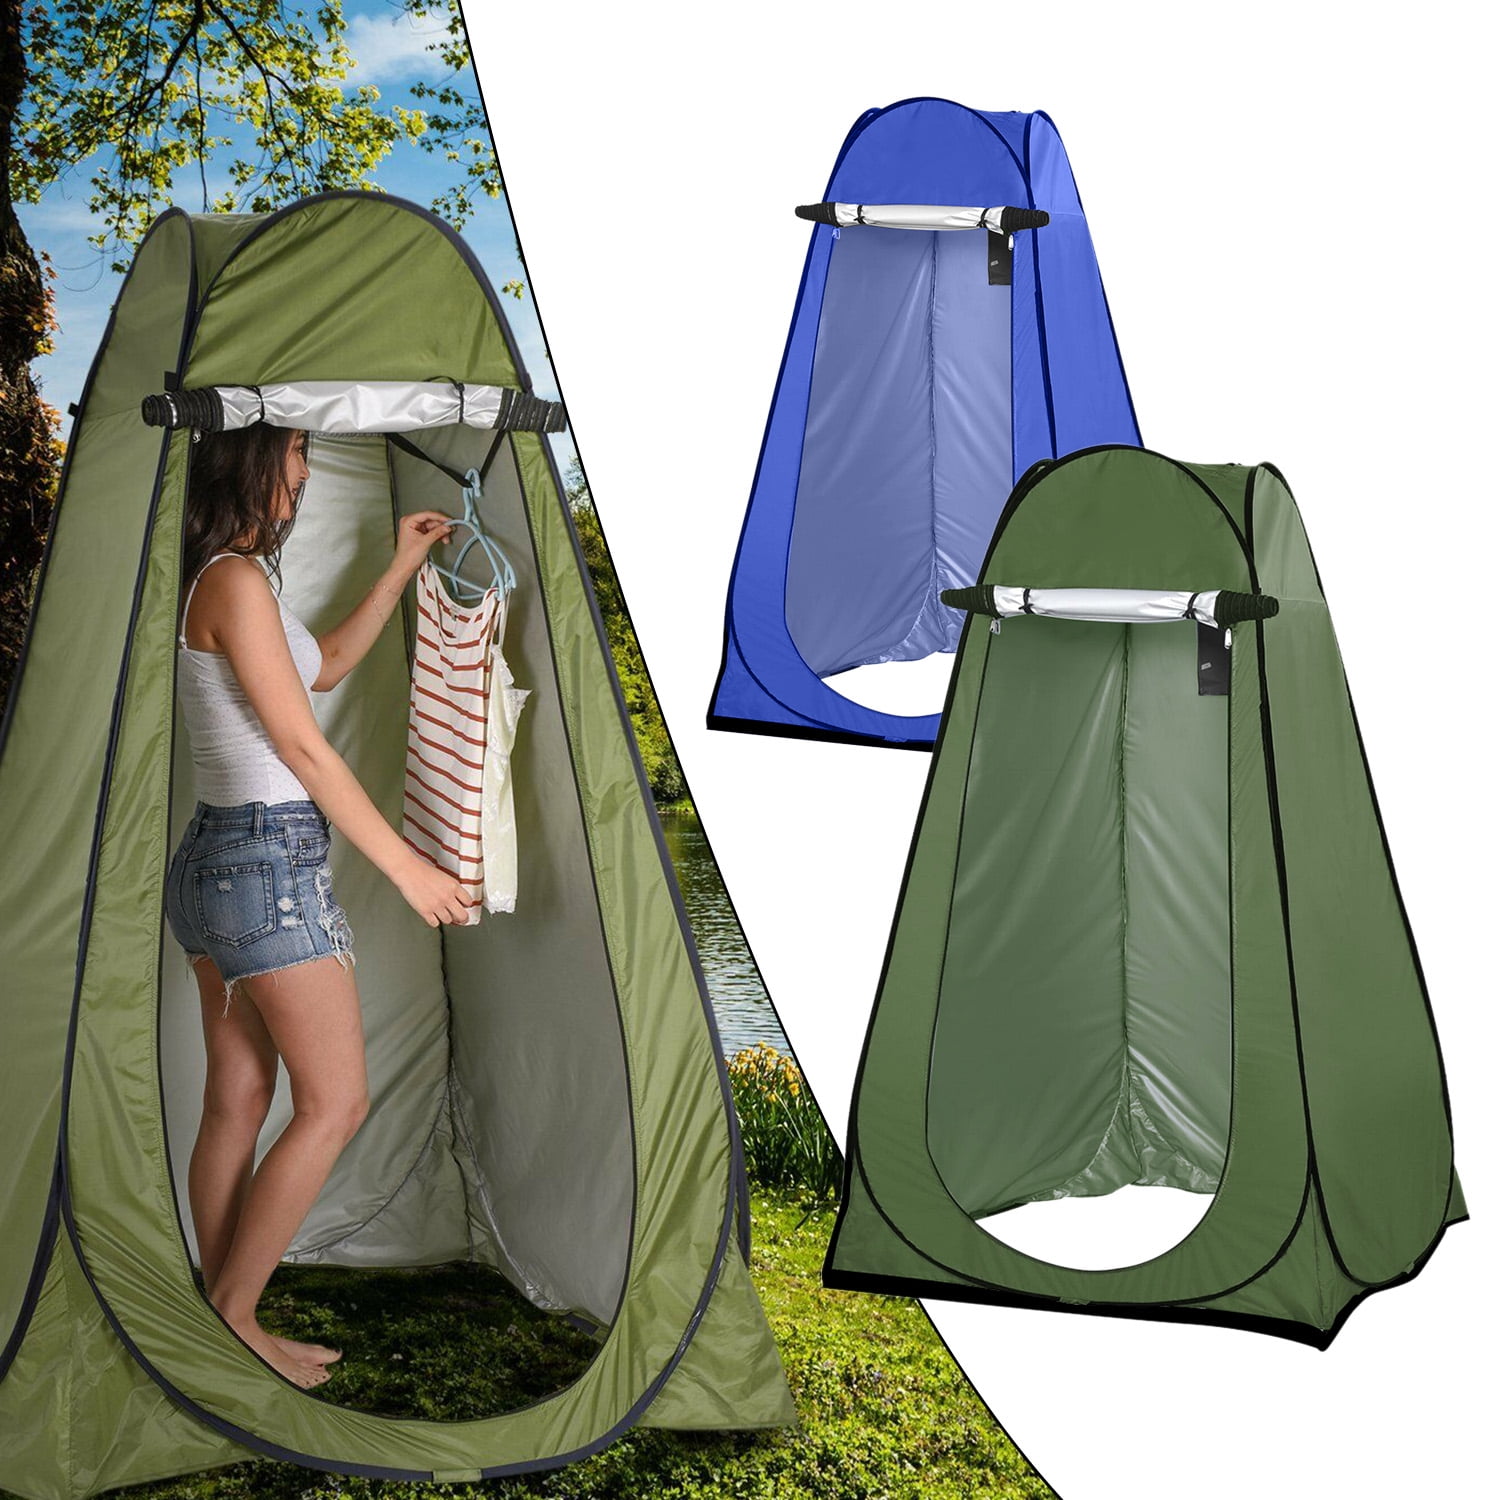 Change Tent Room Portable Outdoor Instant Pop Up Privacy Camping Shower Toilet 